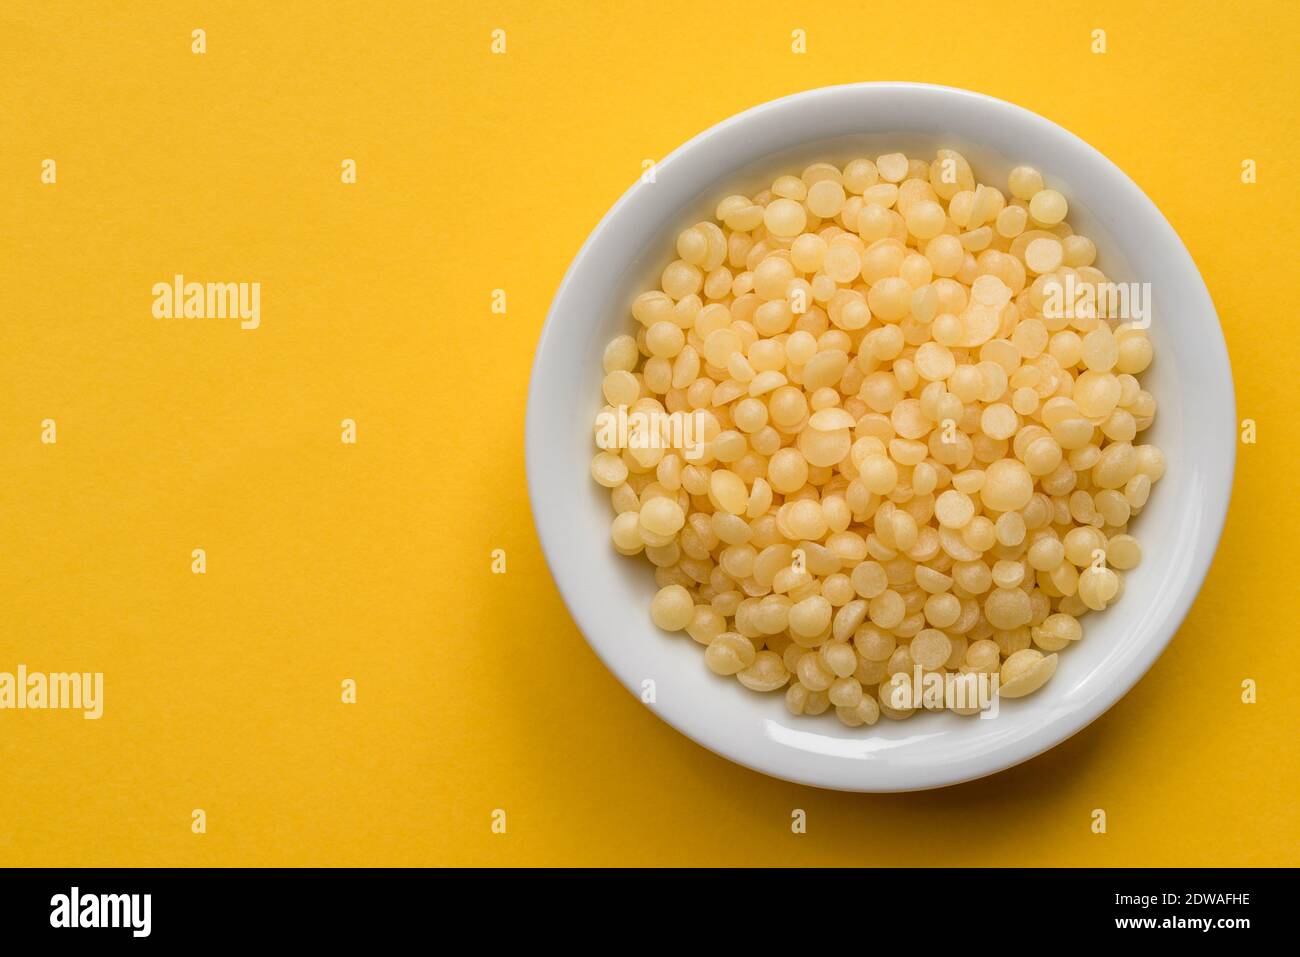 Bees Wax Pellets in a Bowl Stock Photo